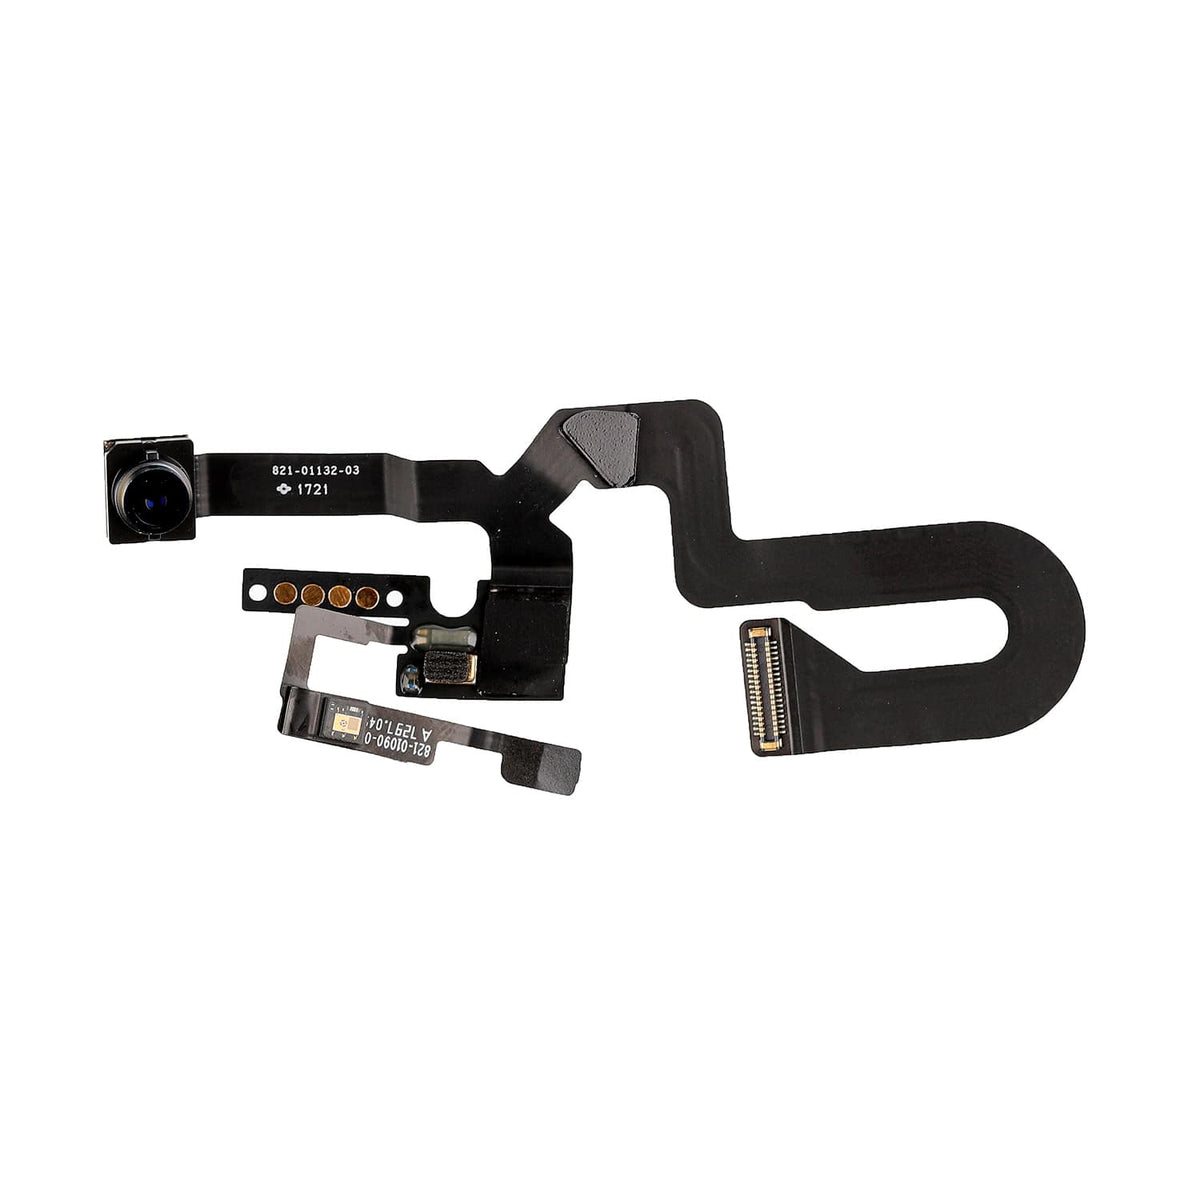 AMBIENT LIGHT SENSOR WITH FRONT CAMERA FLEX CABLE FOR IPHONE 8 PLUS